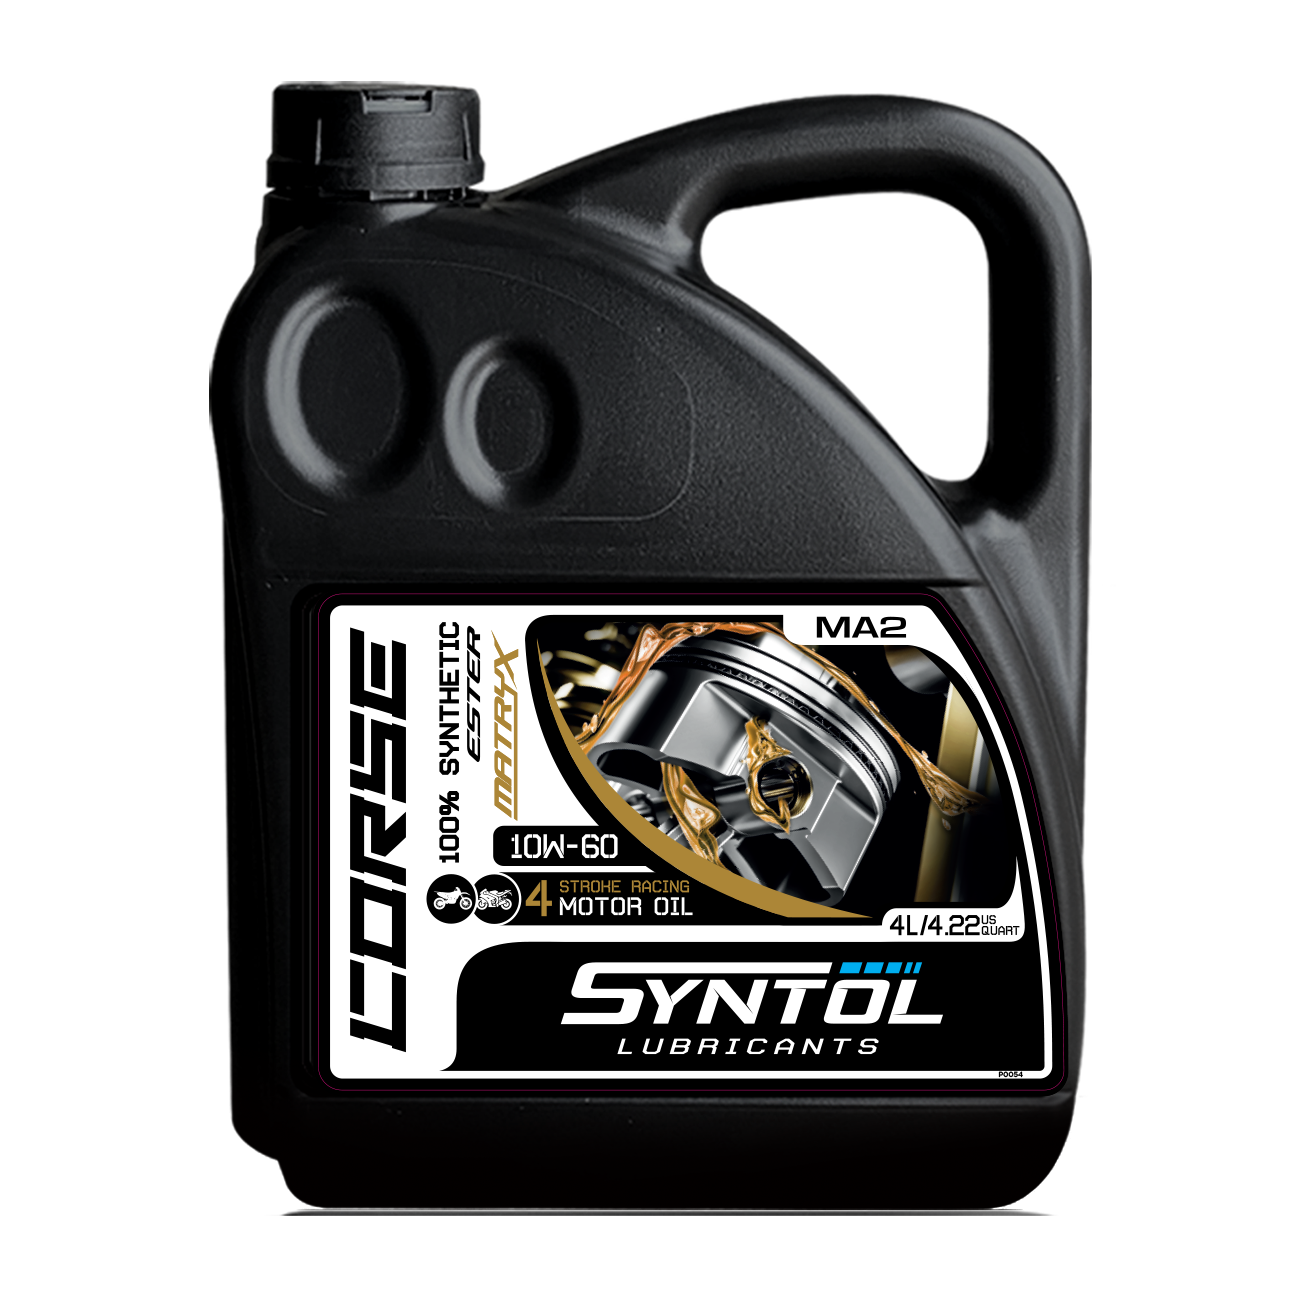 Syntol Corse 4T 10W-60 Motorcycle Engine Oil - 4 Litre-F0048-4-Oils and Lubricants-Pyramid Motorcycle Accessories